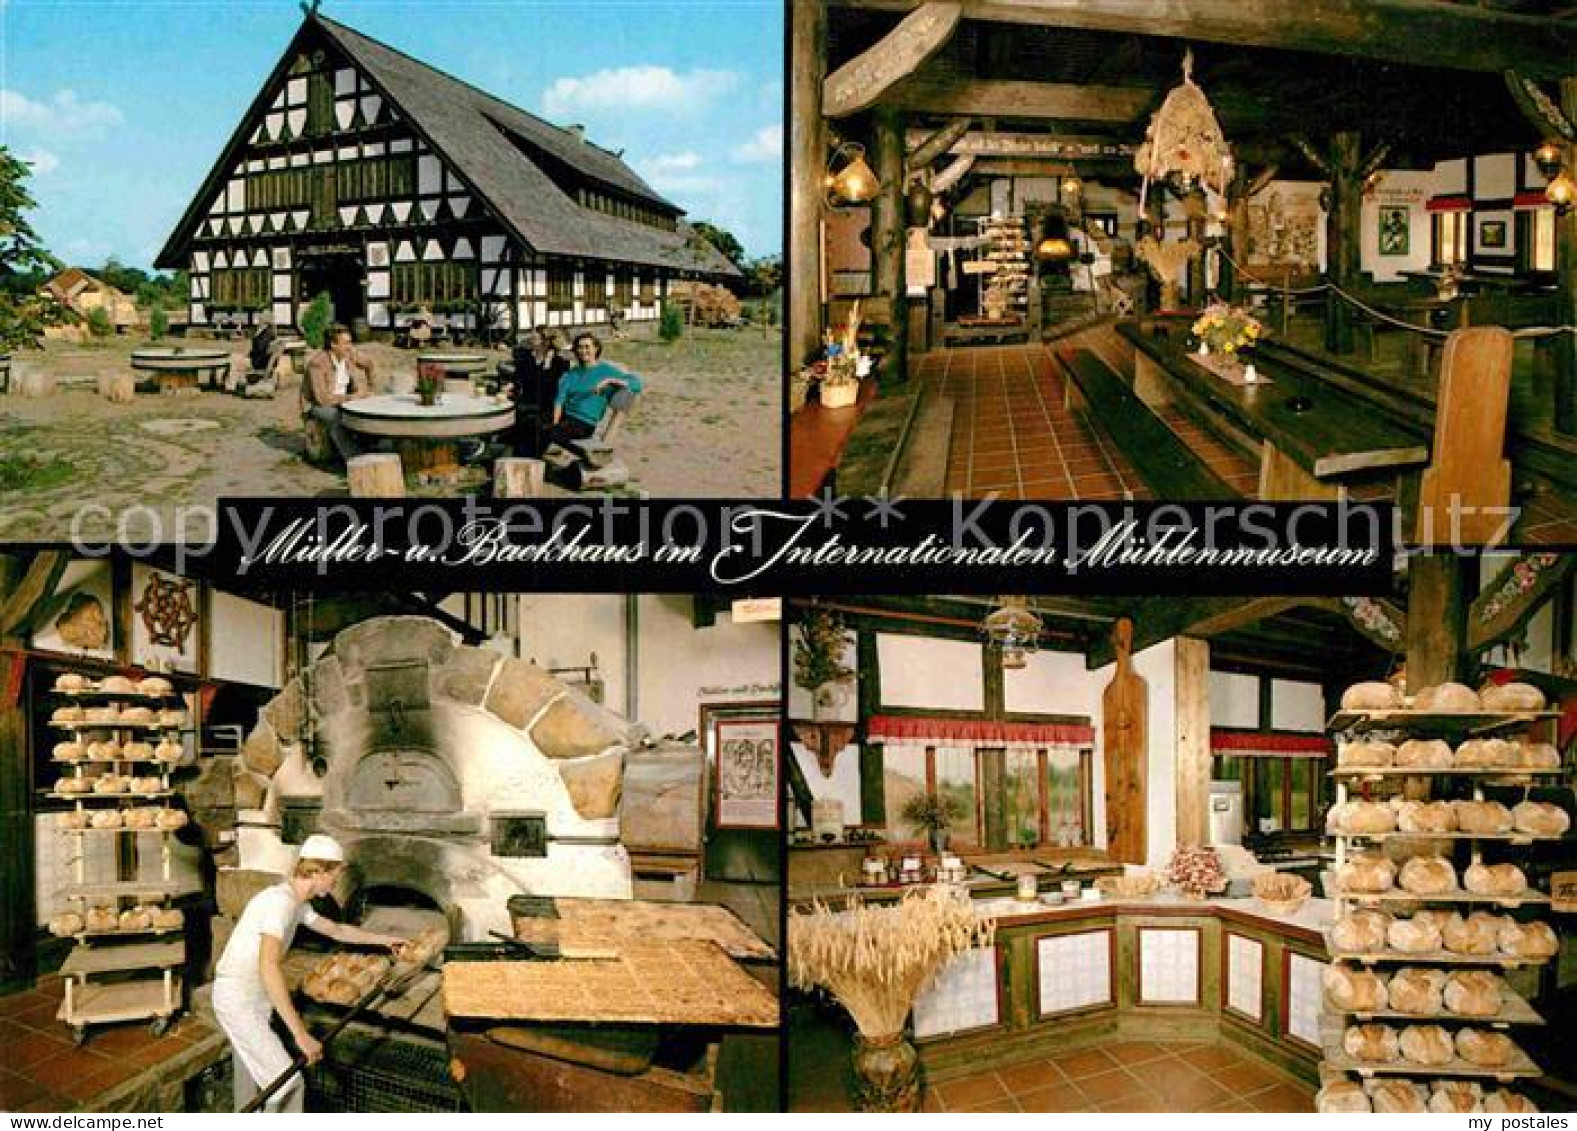 72843929 Gifhorn Internationales Muehlenmuseum Gifhorn - Gifhorn